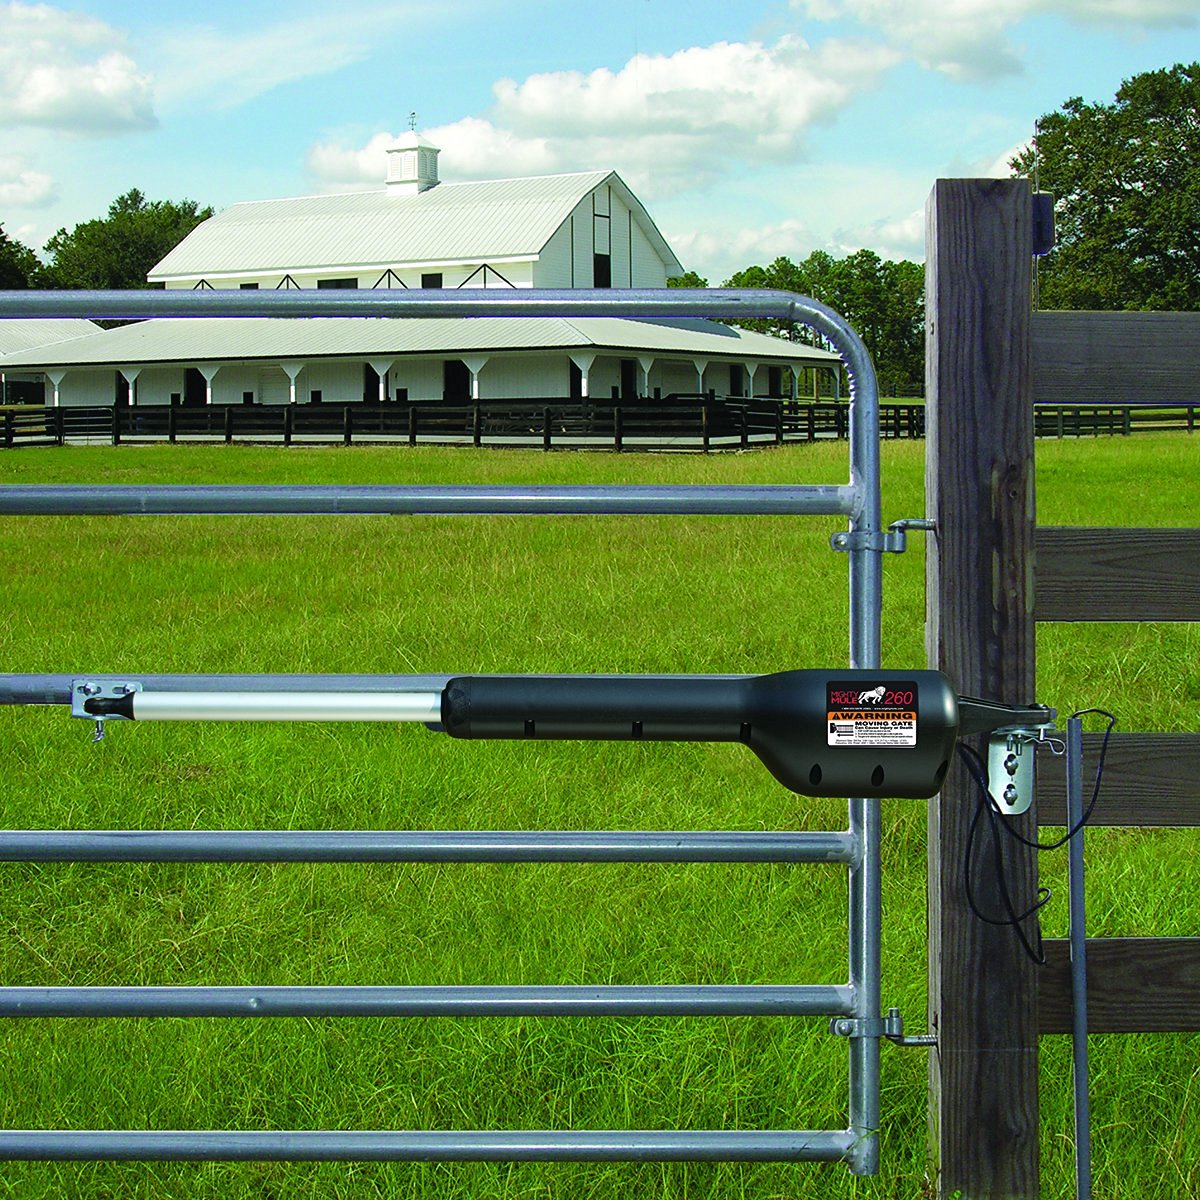 Buy mighty mule mm260 - Online store for landscape supplies & farm fencing, gate openers & keypads in USA, on sale, low price, discount deals, coupon code